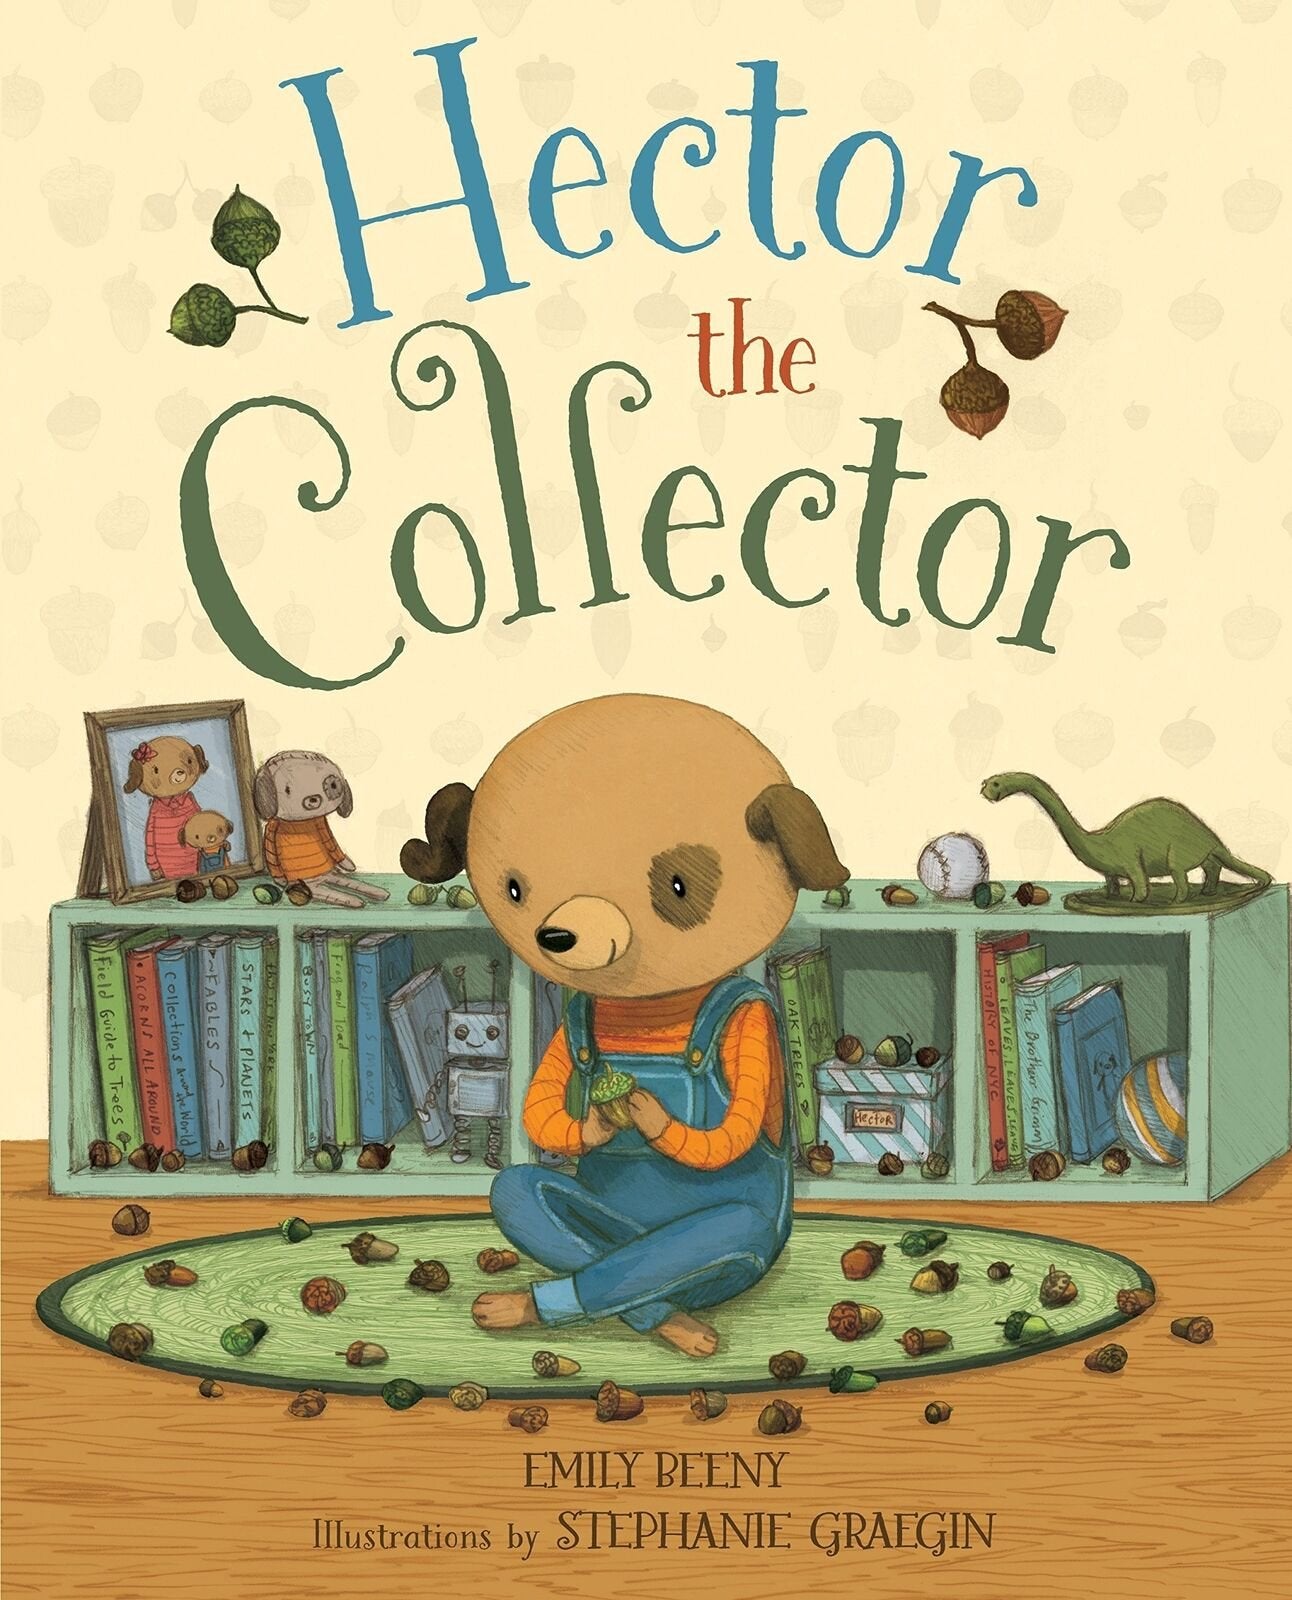 Hector the Collector Beeny, Emily and Graegin, Stephanie